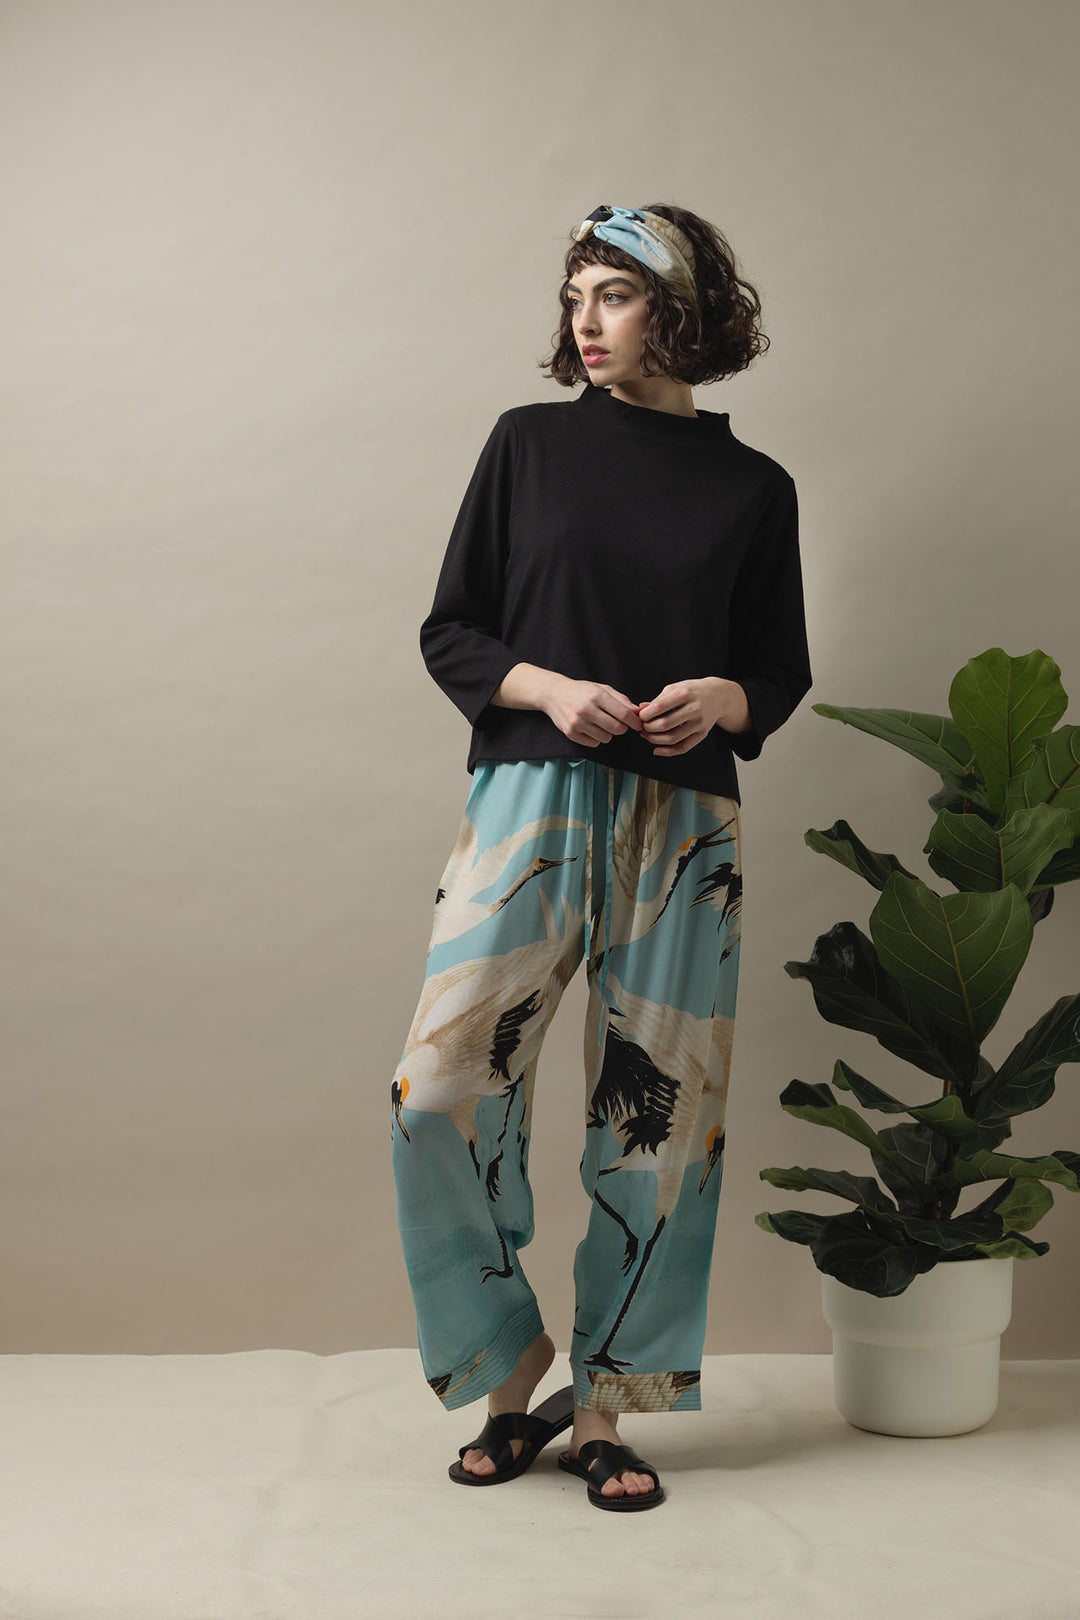 The One Hundred Stars Stork Crane Sky Blue Crepe Lounge Pants are great for that easy to wear outfit this summer, adding luxury to any outfit this season. 